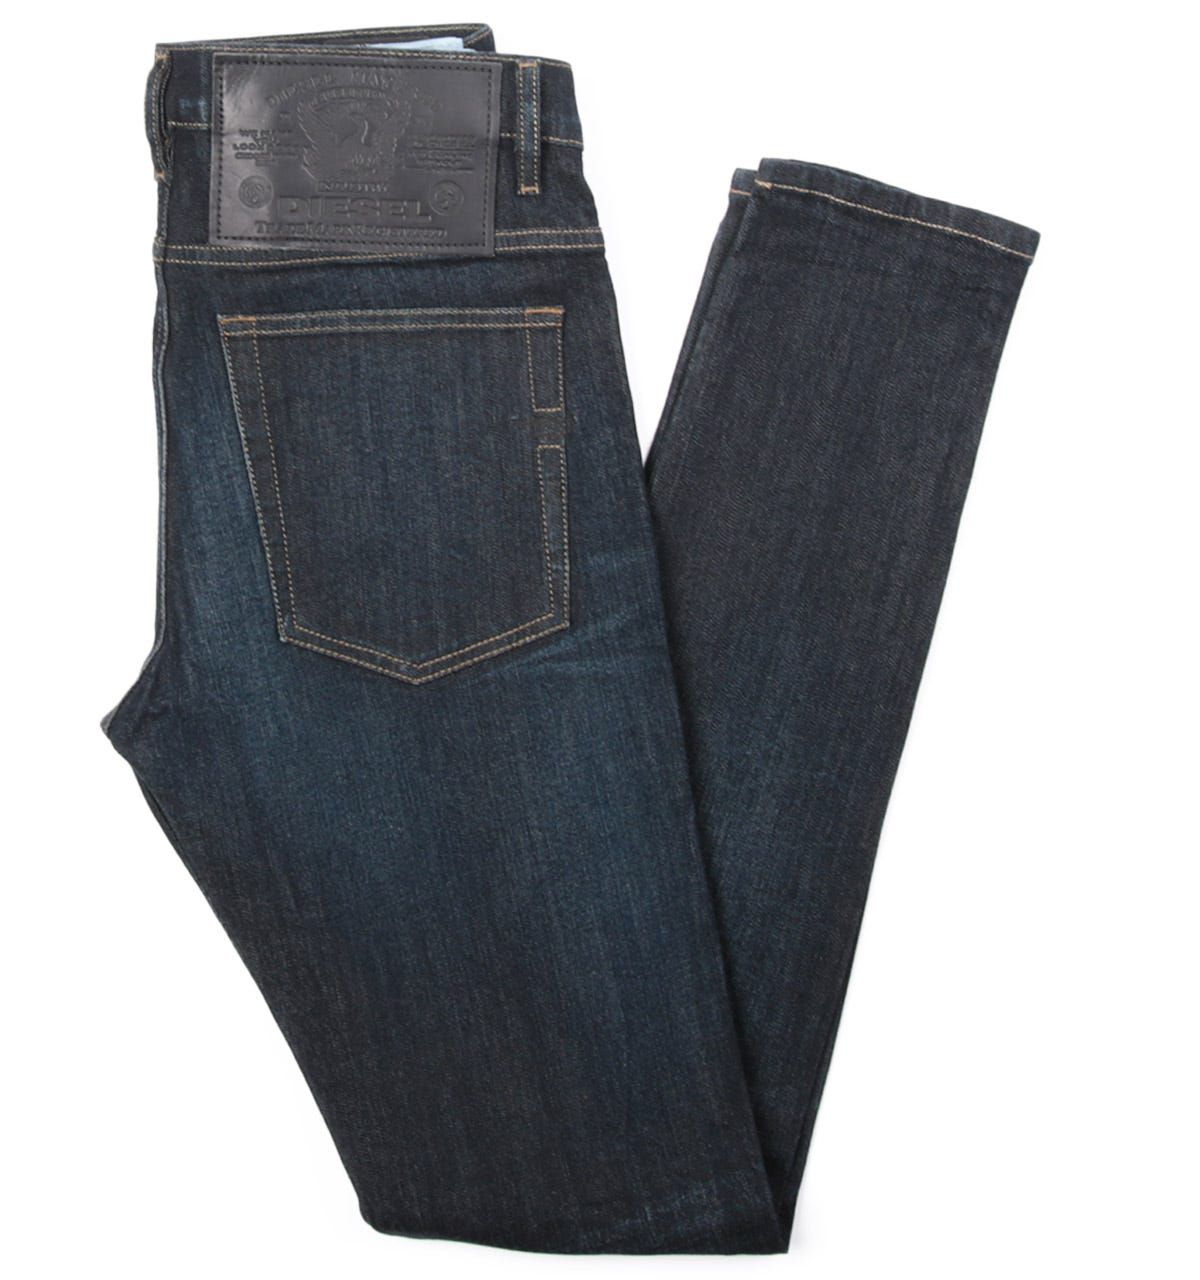 Mens DAmny Sustainable Skinny Fit Jeans